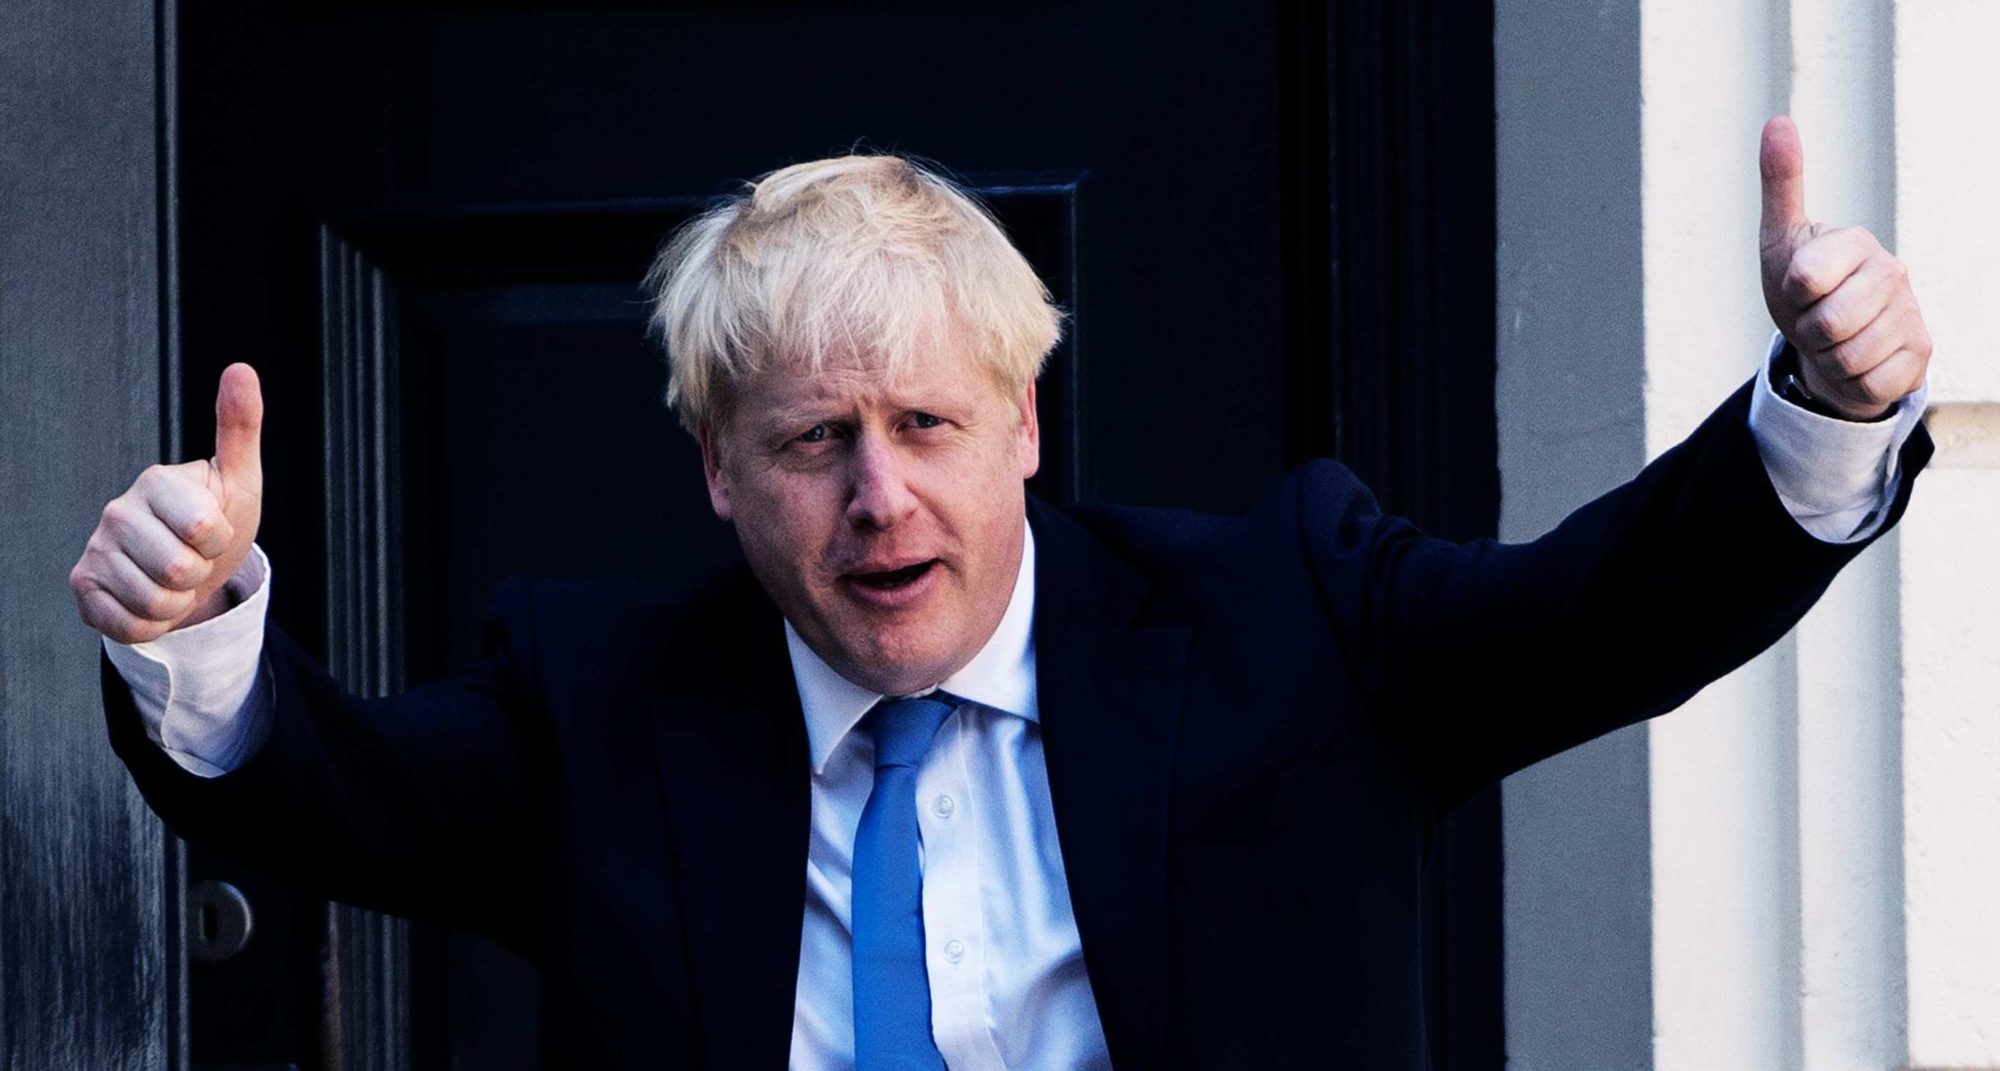 Boris Johnson resignation: The UK Prime Minister Boris Johnson is reportedly mulling to resign after six months due to a low salary.